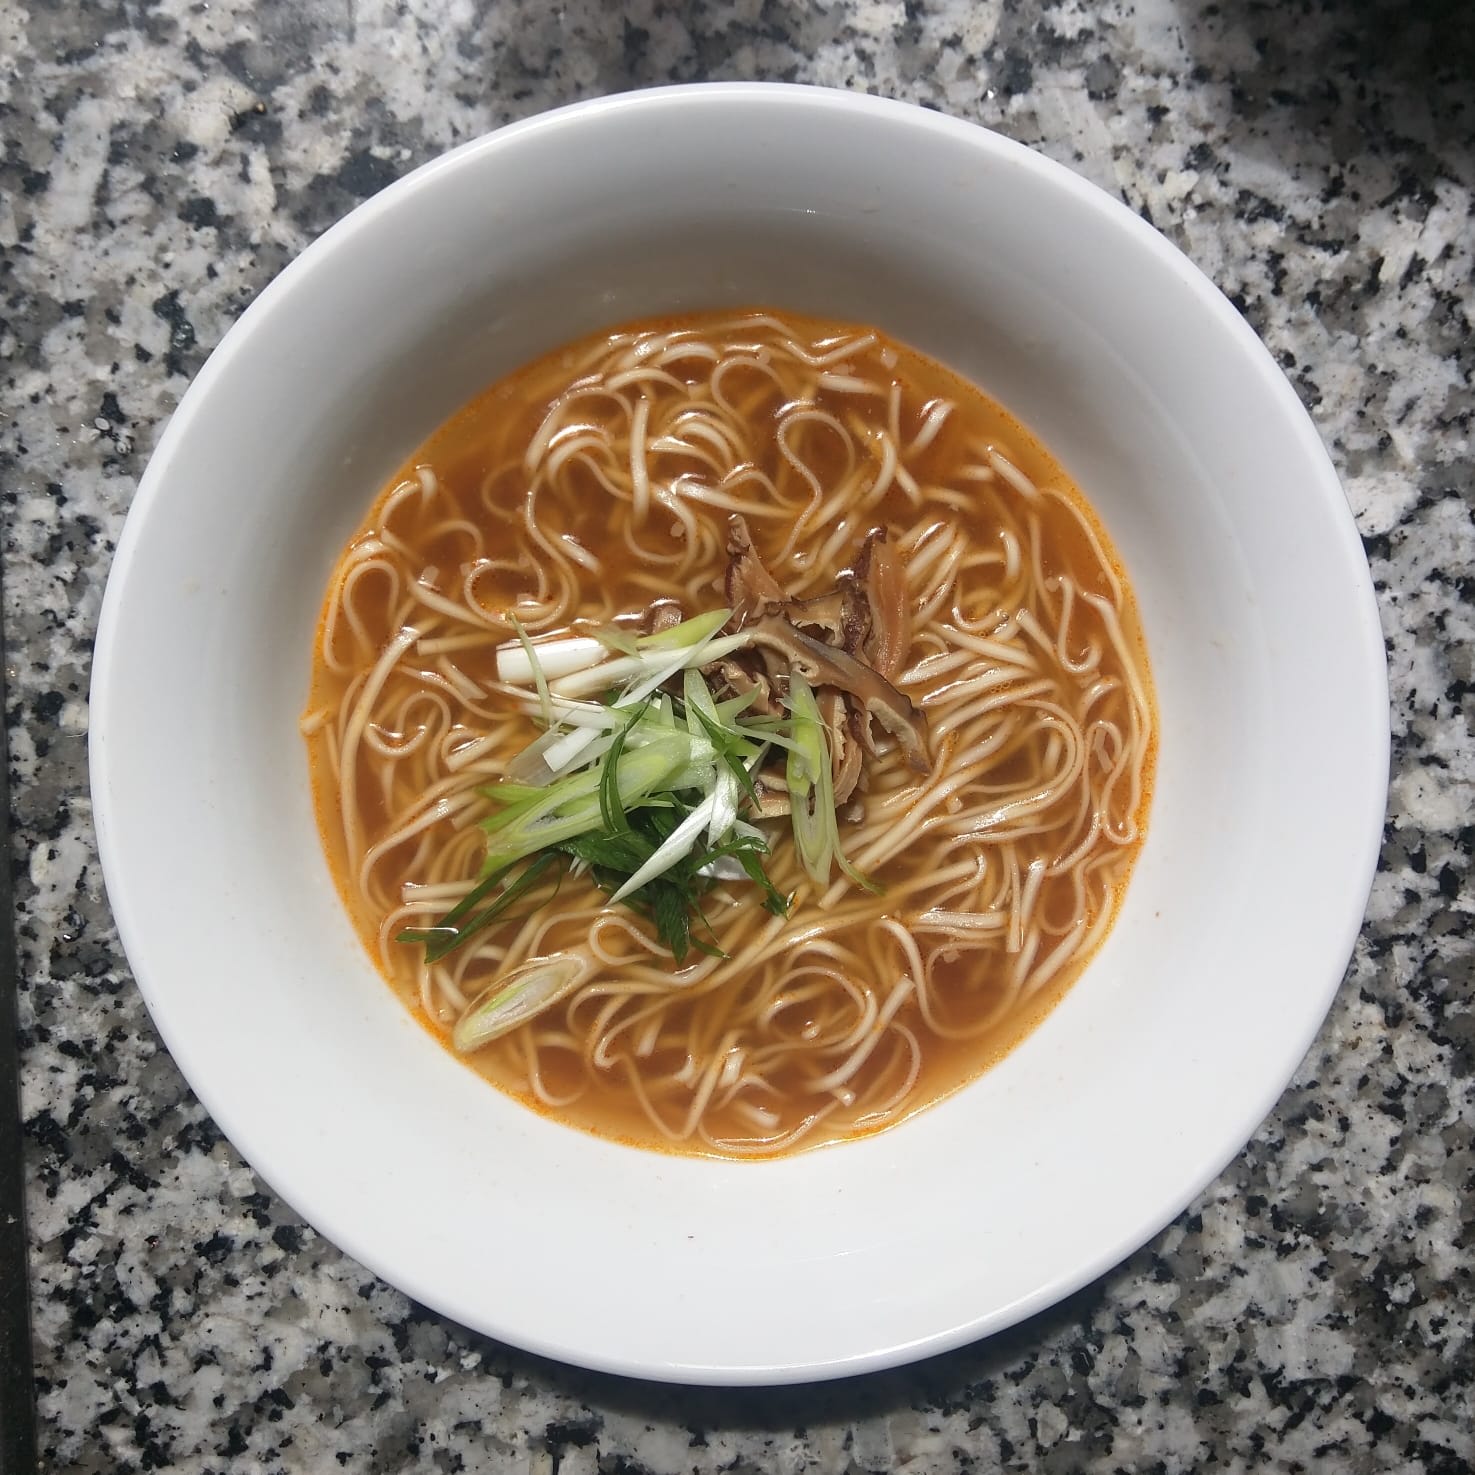 Probably the simplest ramen I ever made: Fish stock, shoyu tare, topped with scallions and shiitake.